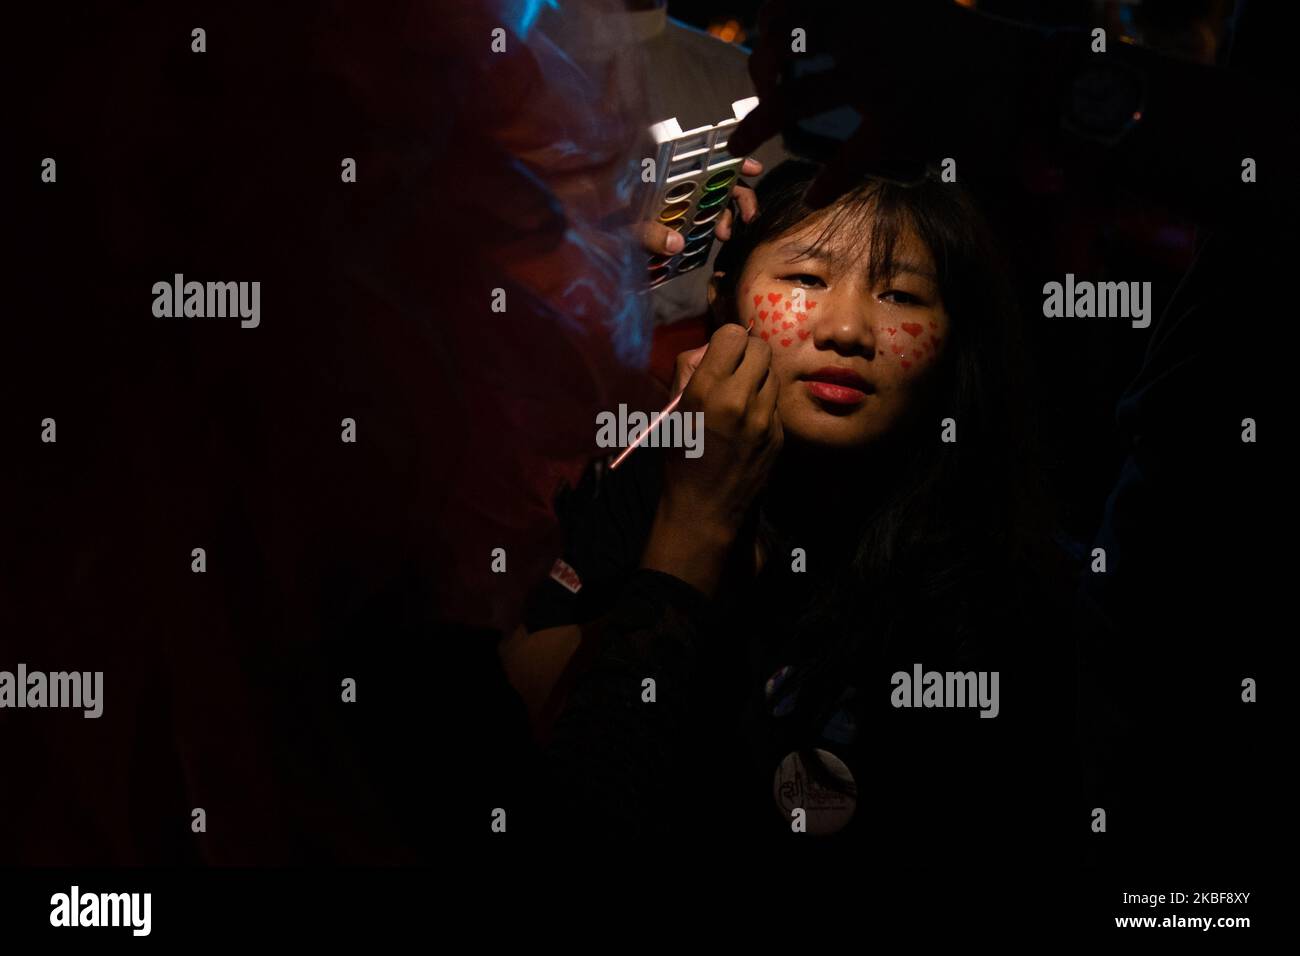 A girl paints her face during the ”&Proud' LGBT festival in Yangon, Myanmar on 24 January, 2020. (Photo by Shwe Paw Mya Tin/NurPhoto) Stock Photo